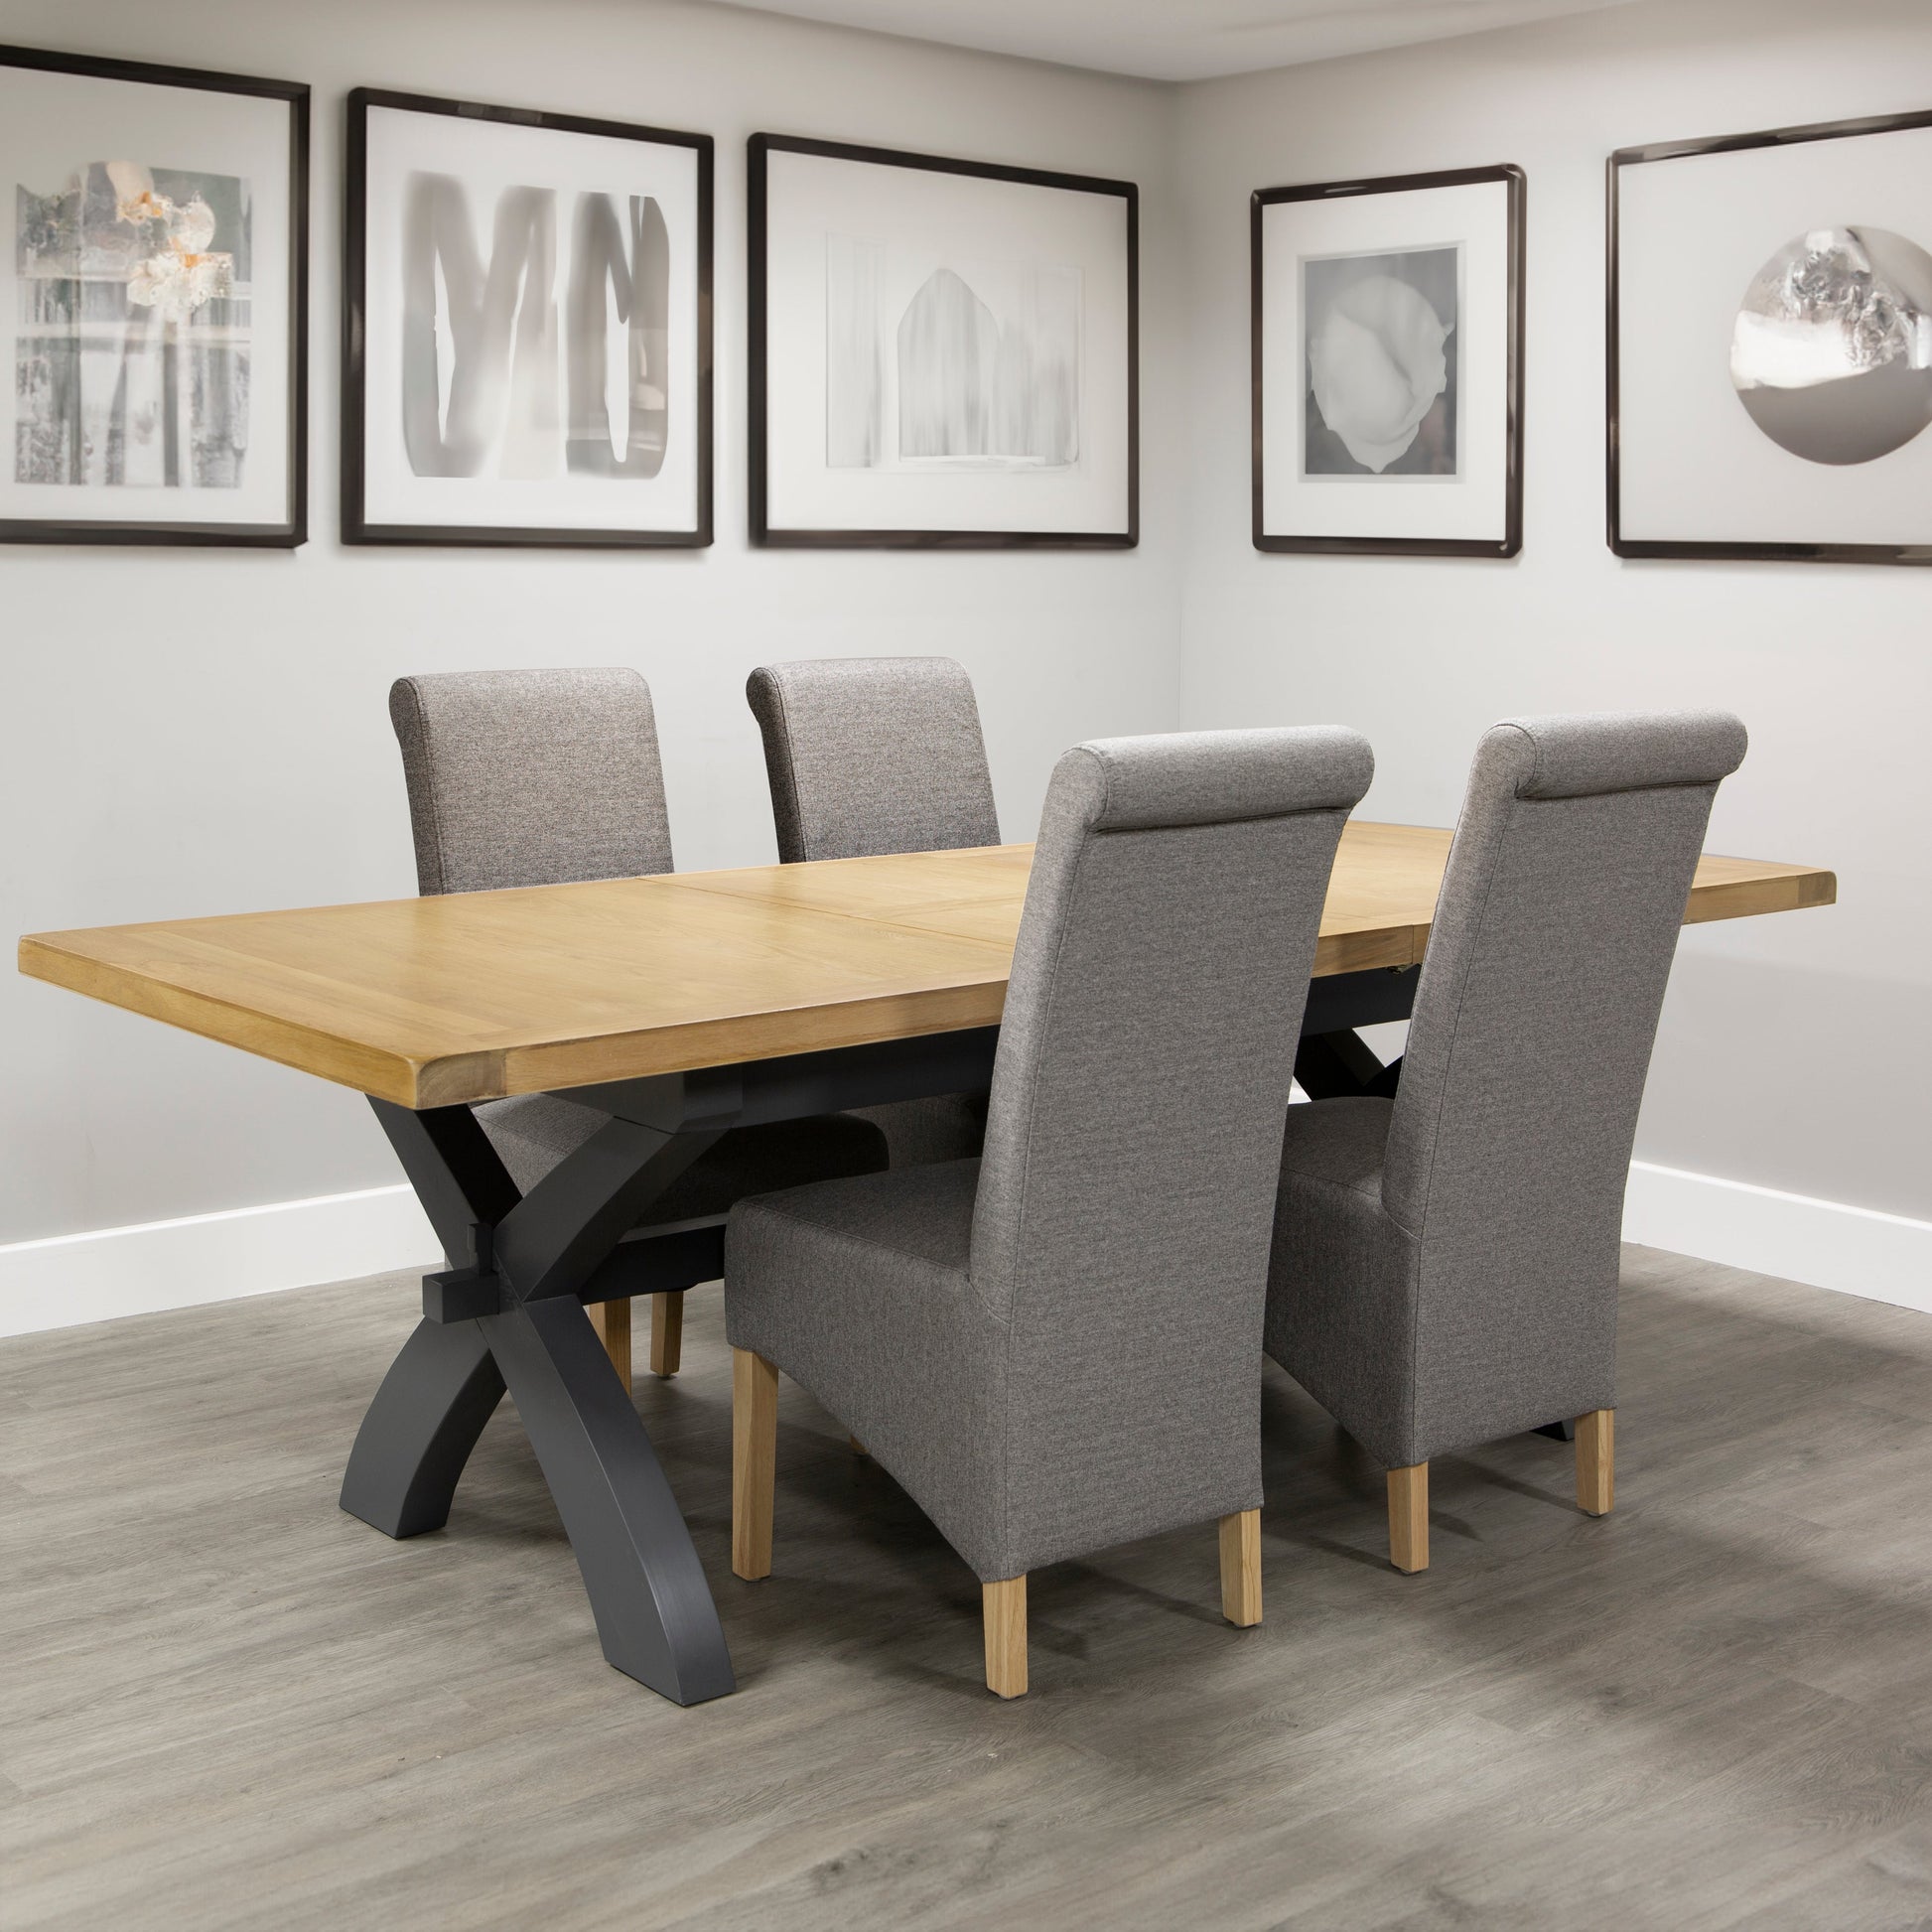 Dining Set - 1x 1.8m Charcoal Cross Extending Table & 4x CH35-DG Chairs